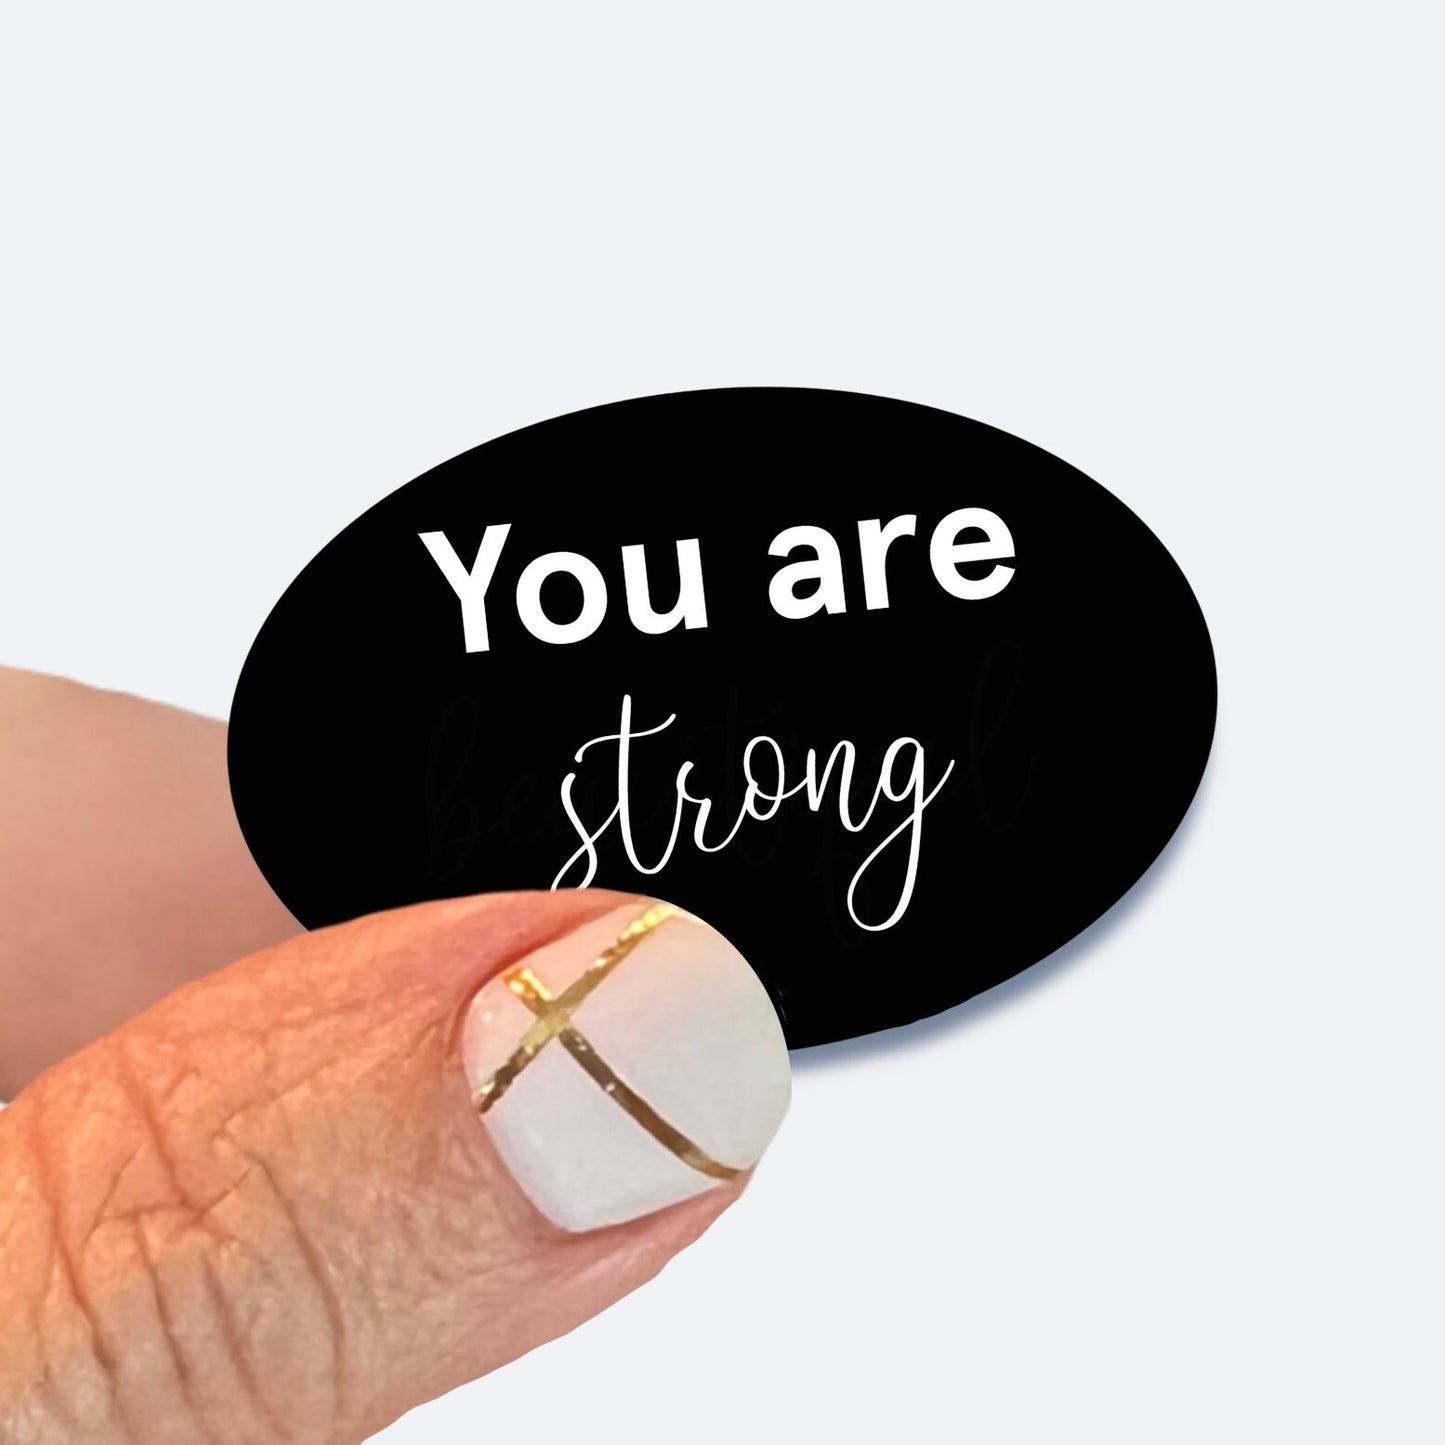 You are strong - UV/ Waterproof Vinyl Sticker/ Decal- Choice of Size, Single or Bulk quantities